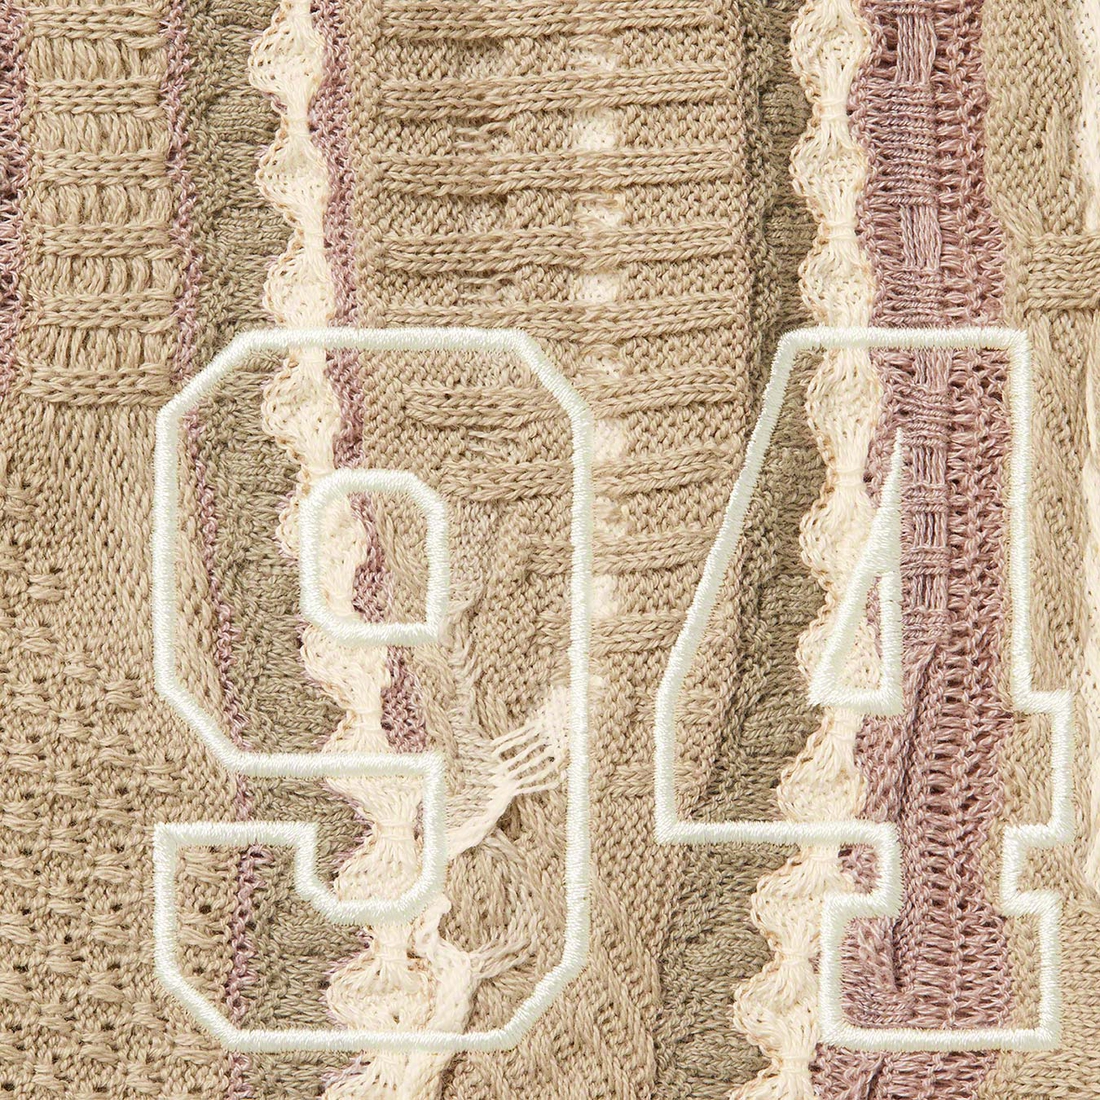 Details on Supreme Coogi Basketball Short Tan from spring summer 2023 (Price is $168)